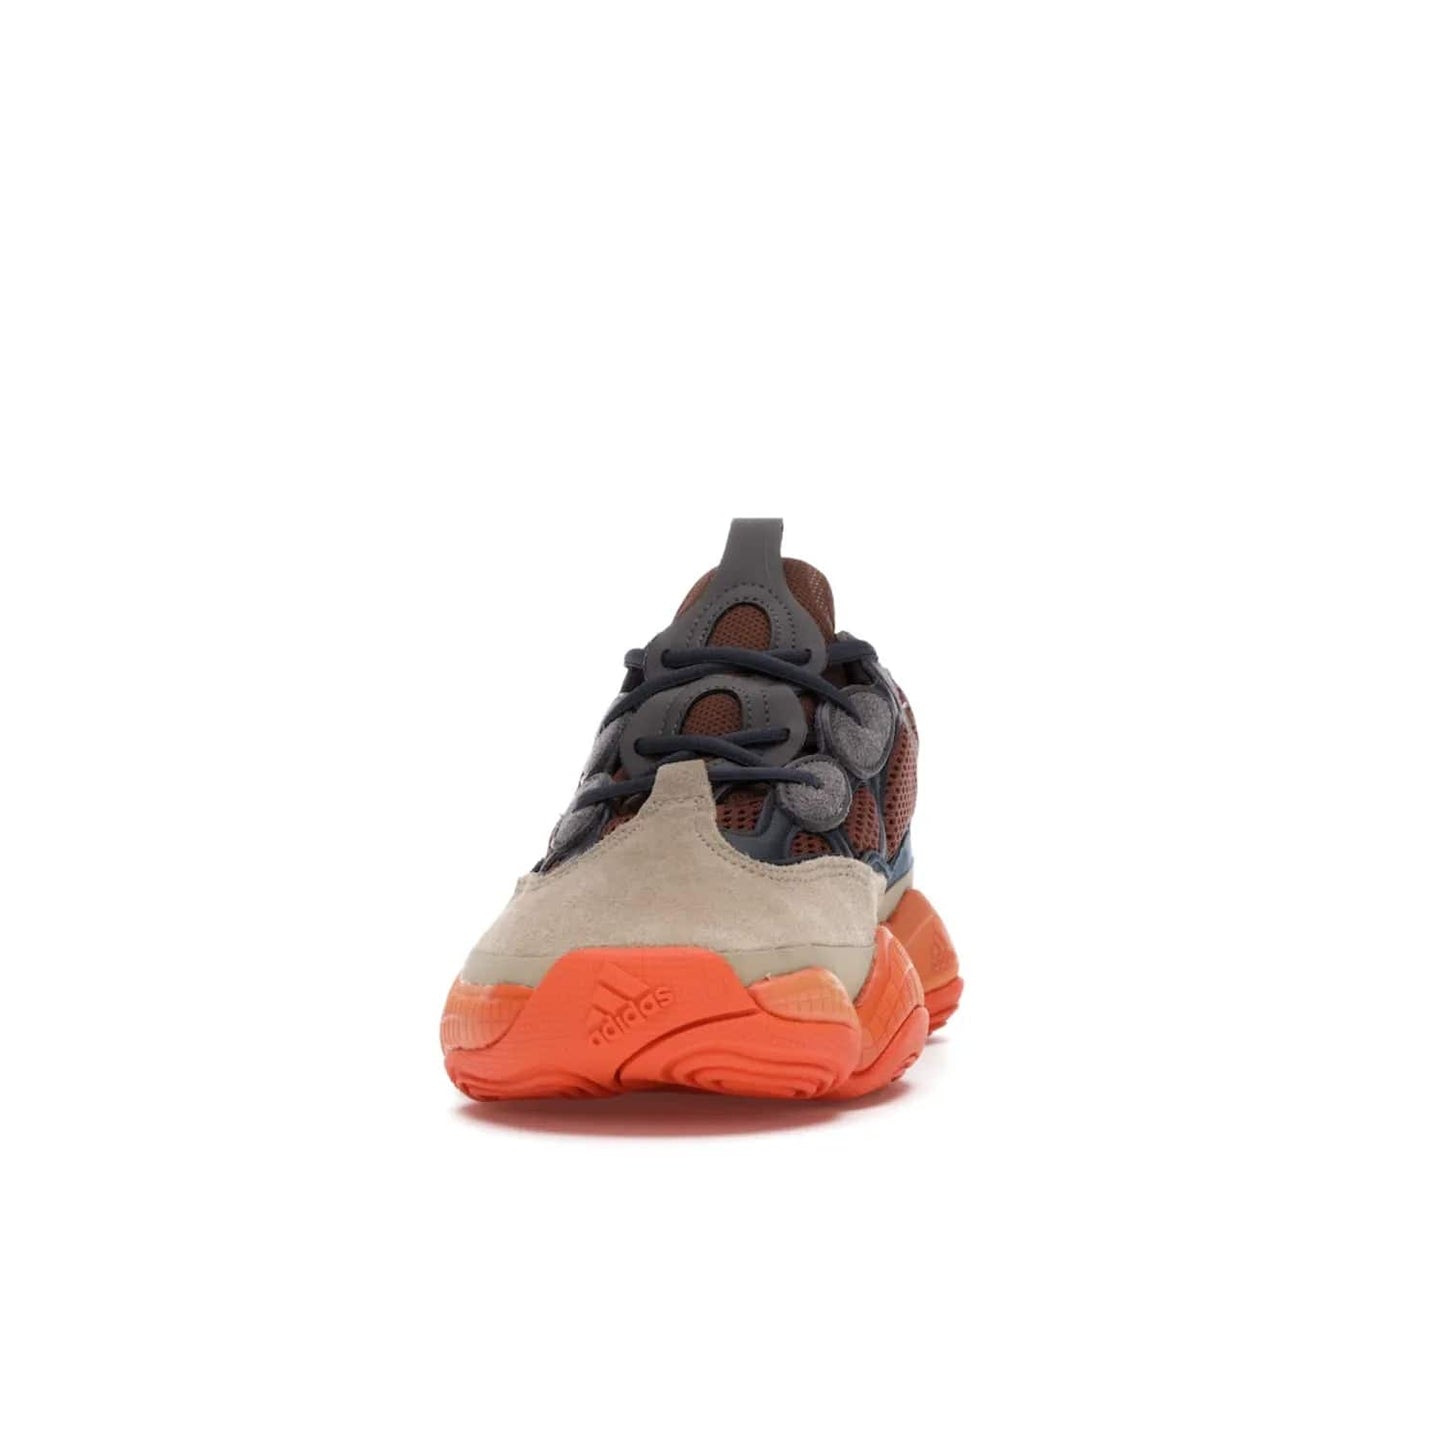 adidas Yeezy 500 Enflame - Image 11 - Only at www.BallersClubKickz.com - Step into style with the adidas Yeezy 500 Enflame. Mix of mesh, leather, and suede layered together to create tonal-brown, dark blue, & orange. Orange AdiPRENE sole provides superior cushioning & comfort. Get yours and experience maximum style.